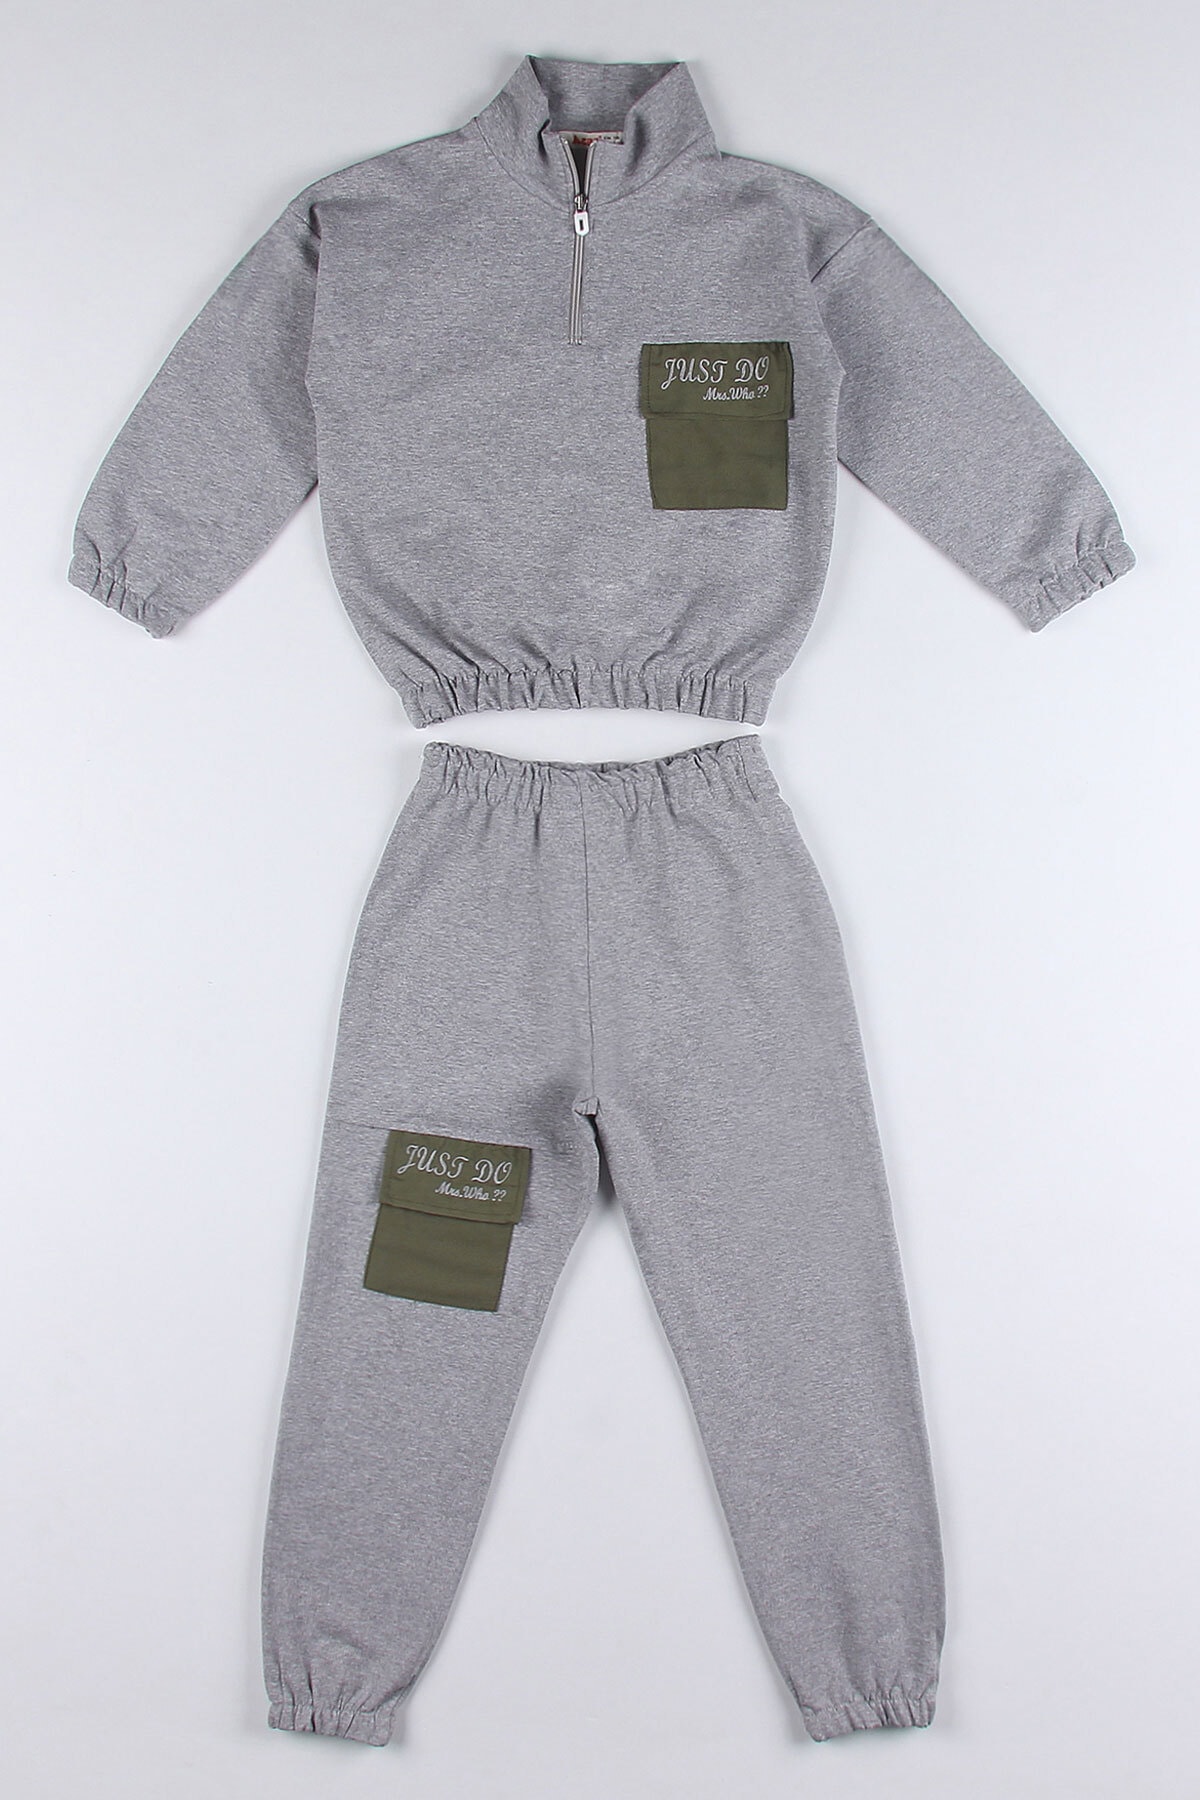 Levně zepkids Girl's Gray Colored Just Do Printed Tracksuit Set with Pockets, Zipper and Elastic Waist.